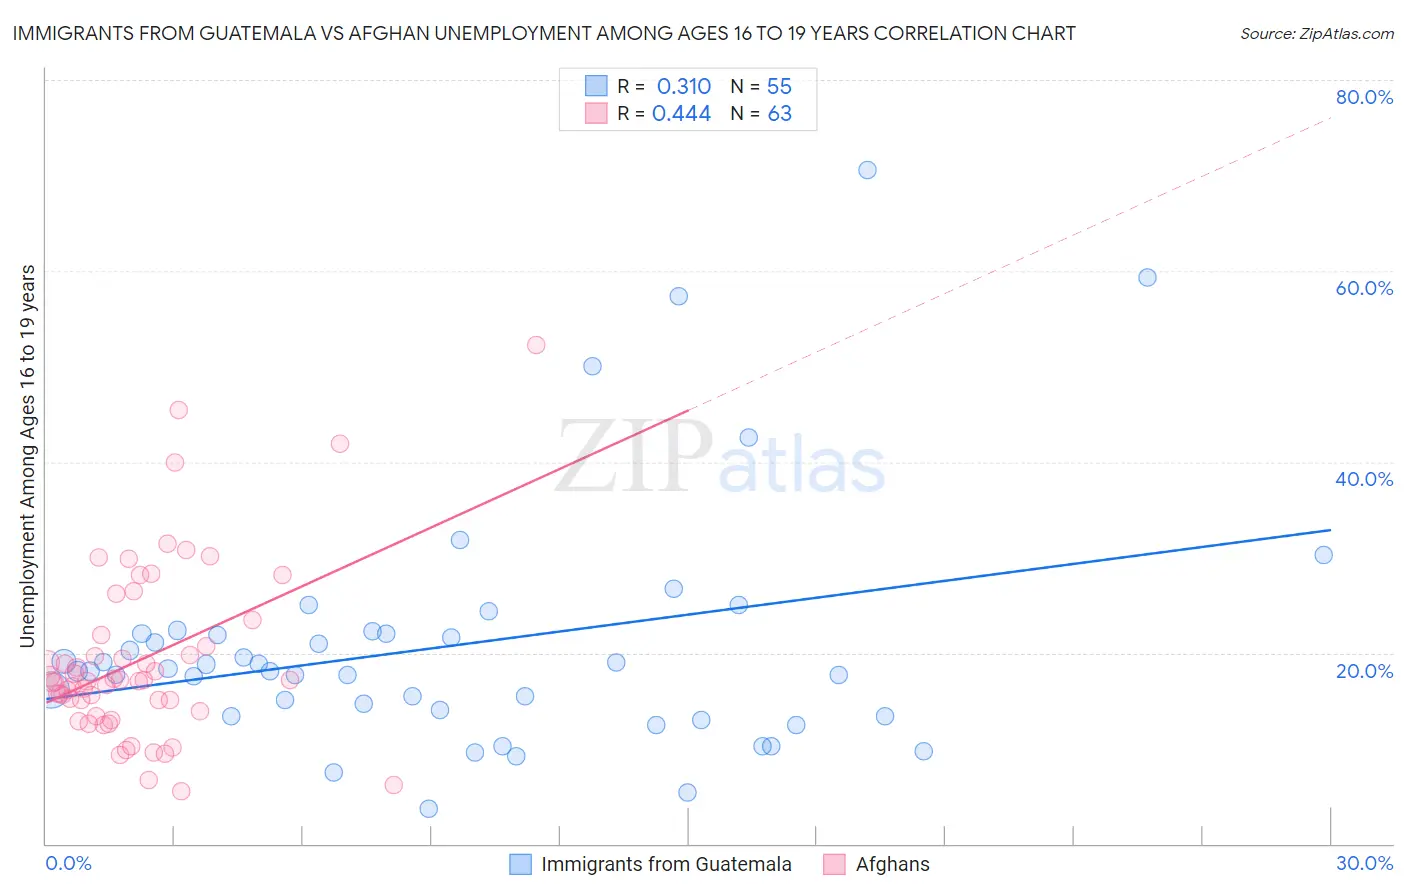 Immigrants from Guatemala vs Afghan Unemployment Among Ages 16 to 19 years